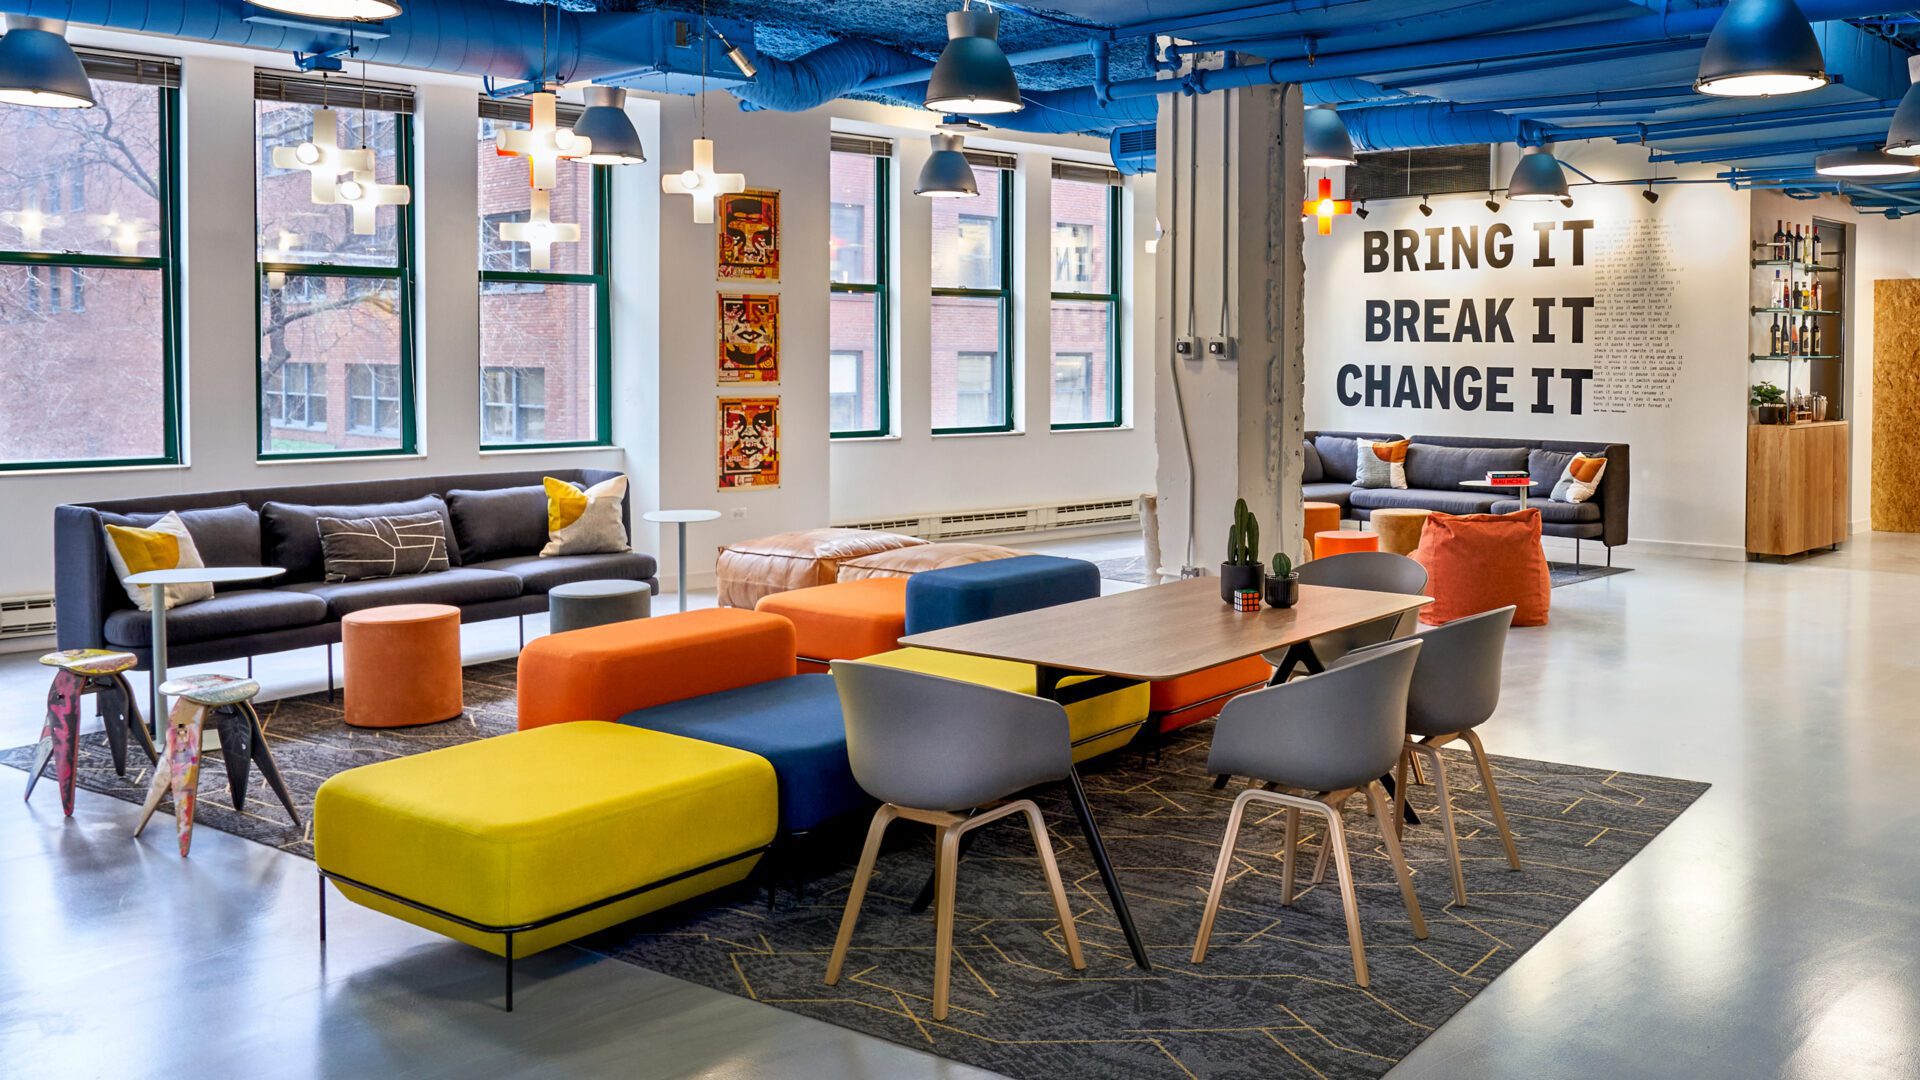 Seating area with bright colors. "Bring. Break it. Change it." is written on wall.